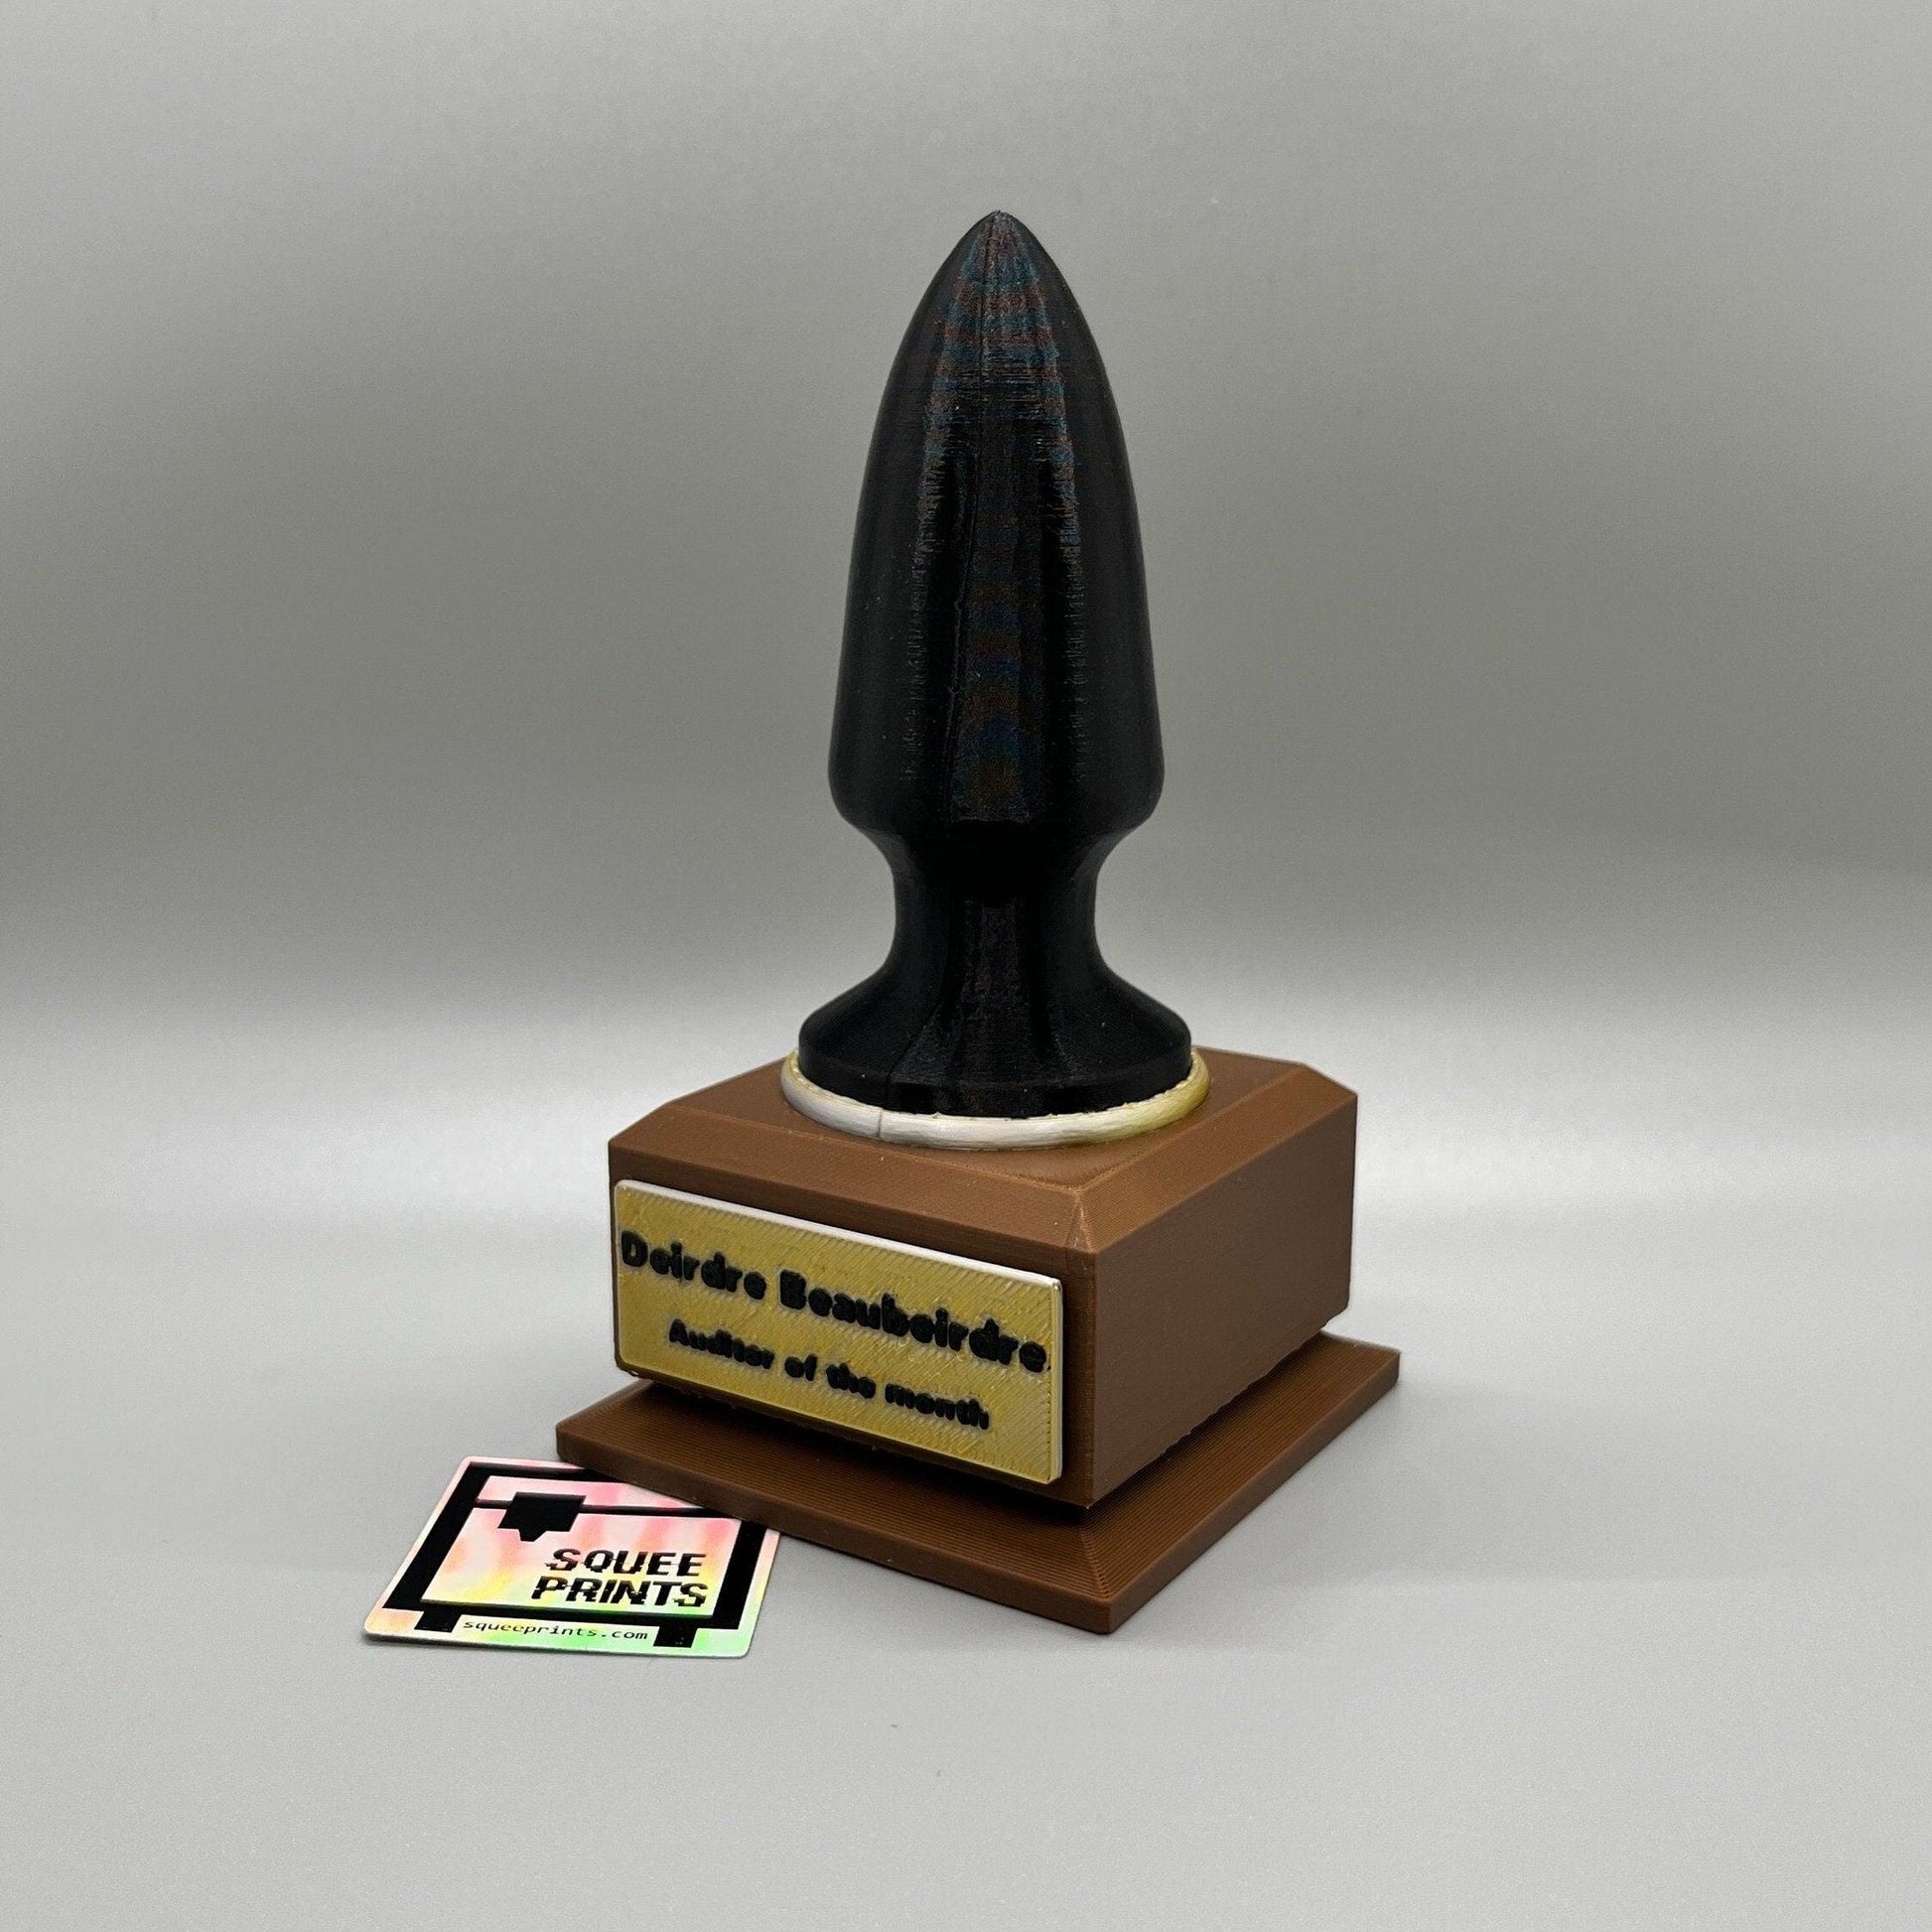 Everything Everywhere All at Once Trophy | Auditor of the Month | Customizable - Squee Prints